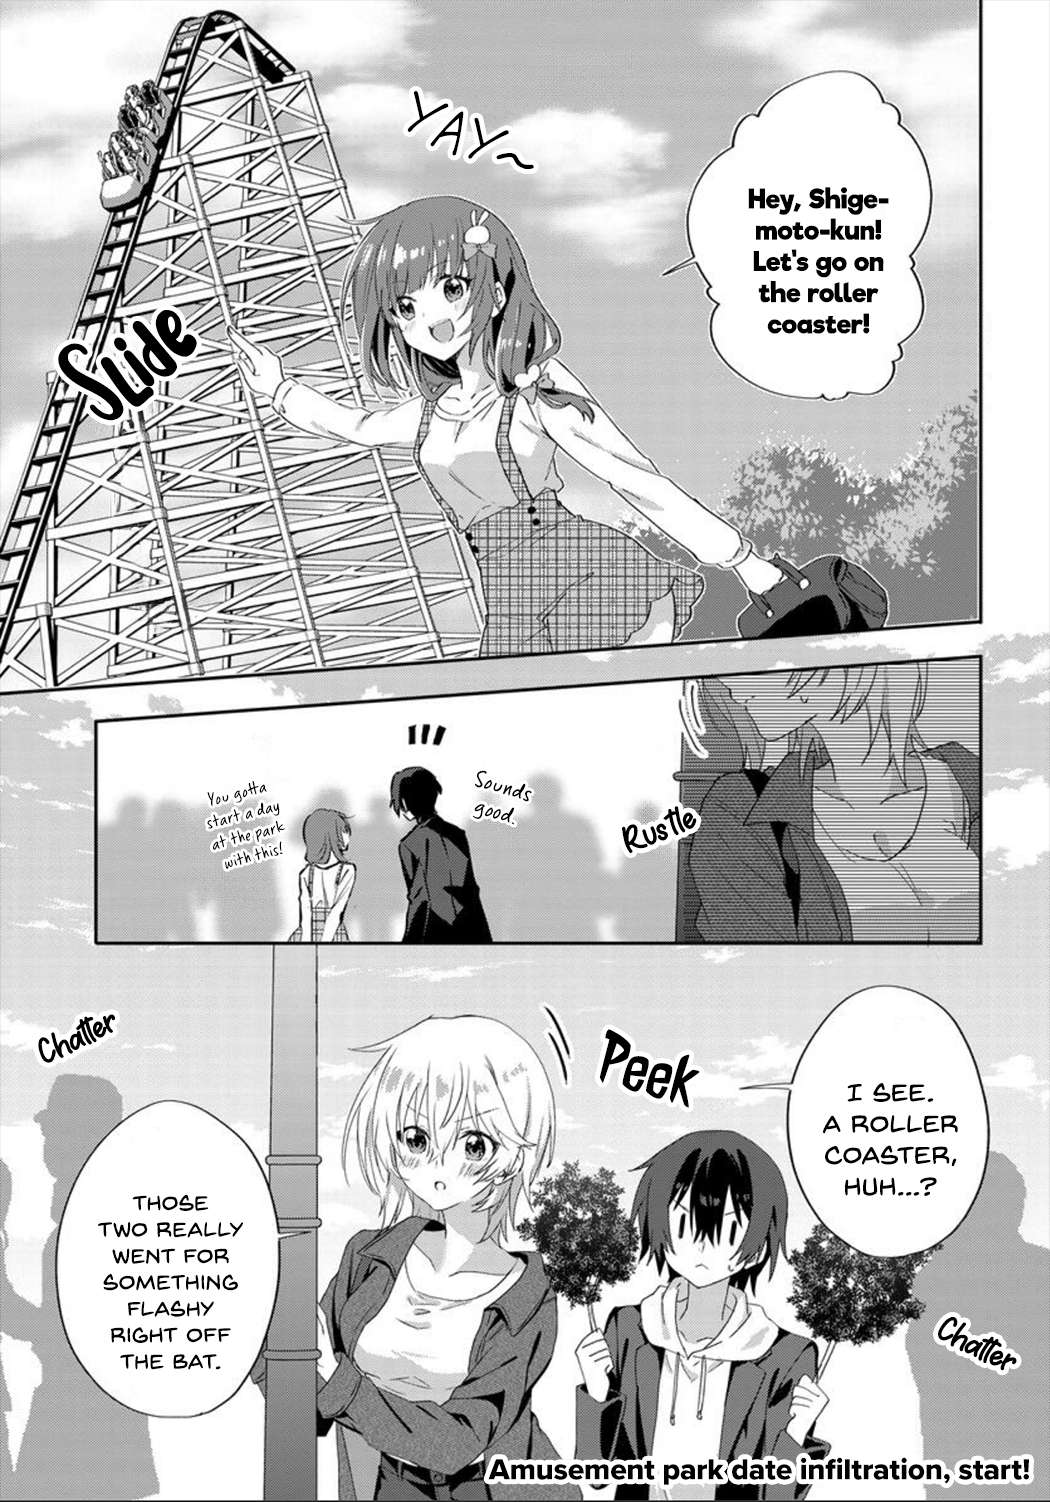 Since I’Ve Entered The World Of Romantic Comedy Manga, I’Ll Do My Best To Make The Losing Heroine Happy - chapter 7.1 - #1